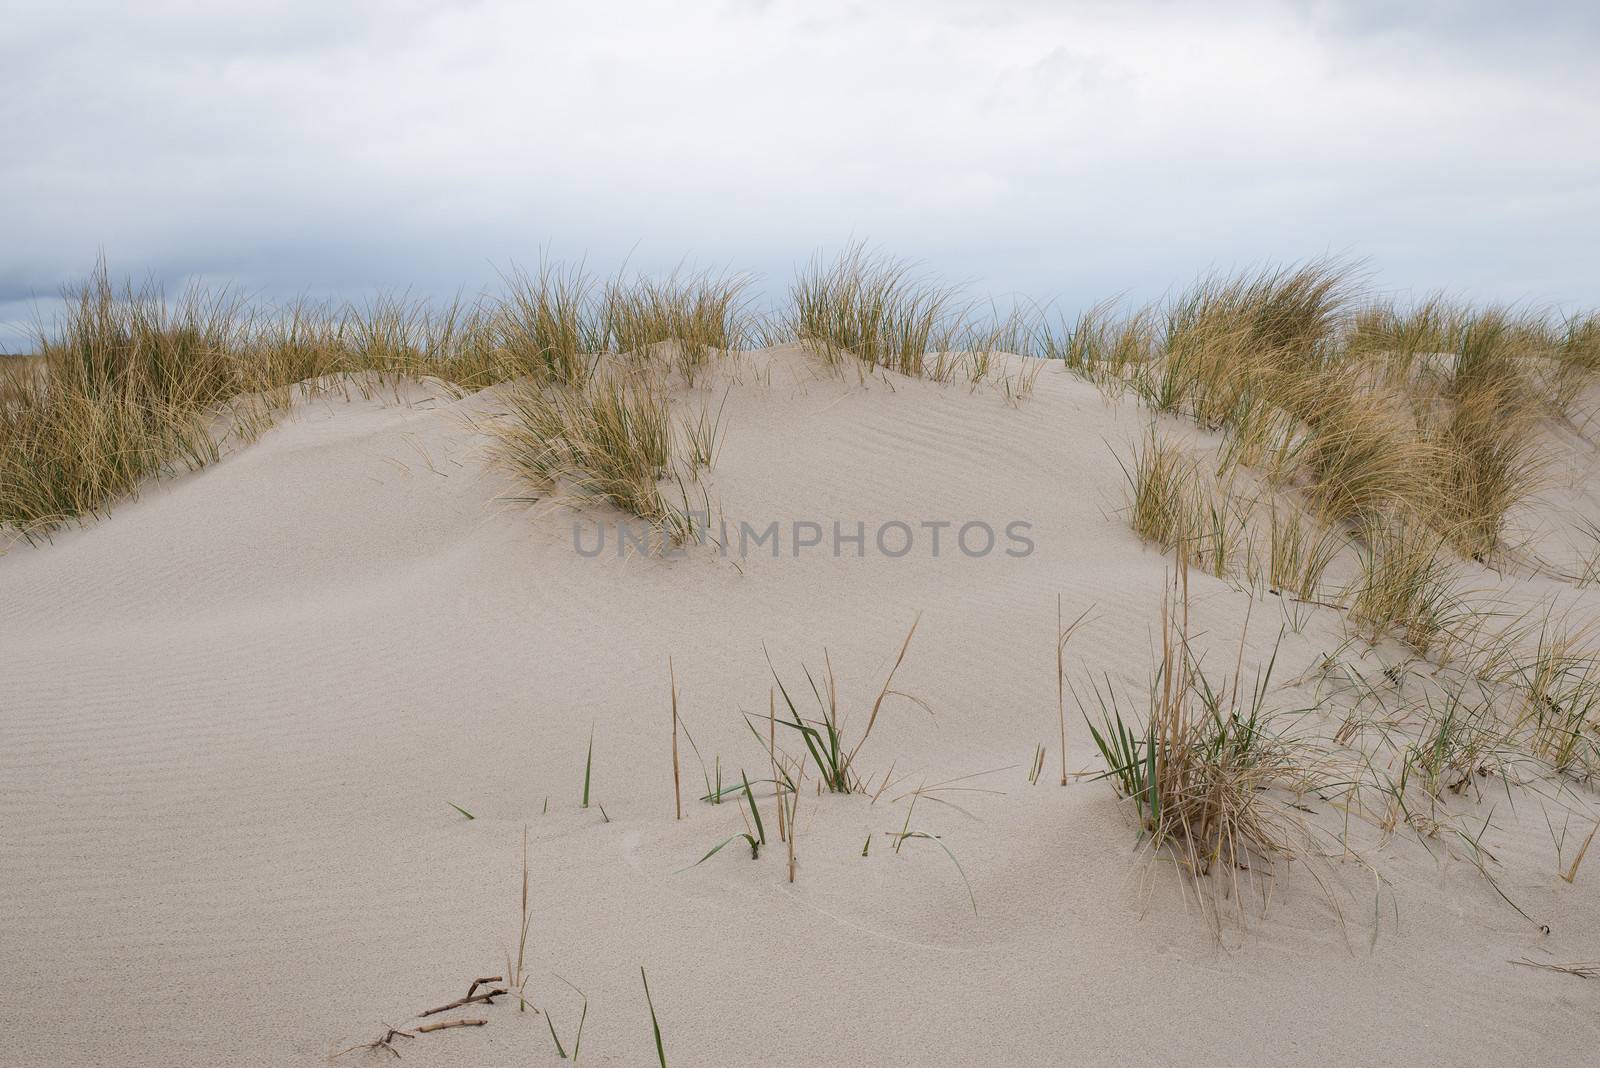 Sand dunes with beachgrass at the island of Sylt in Germany